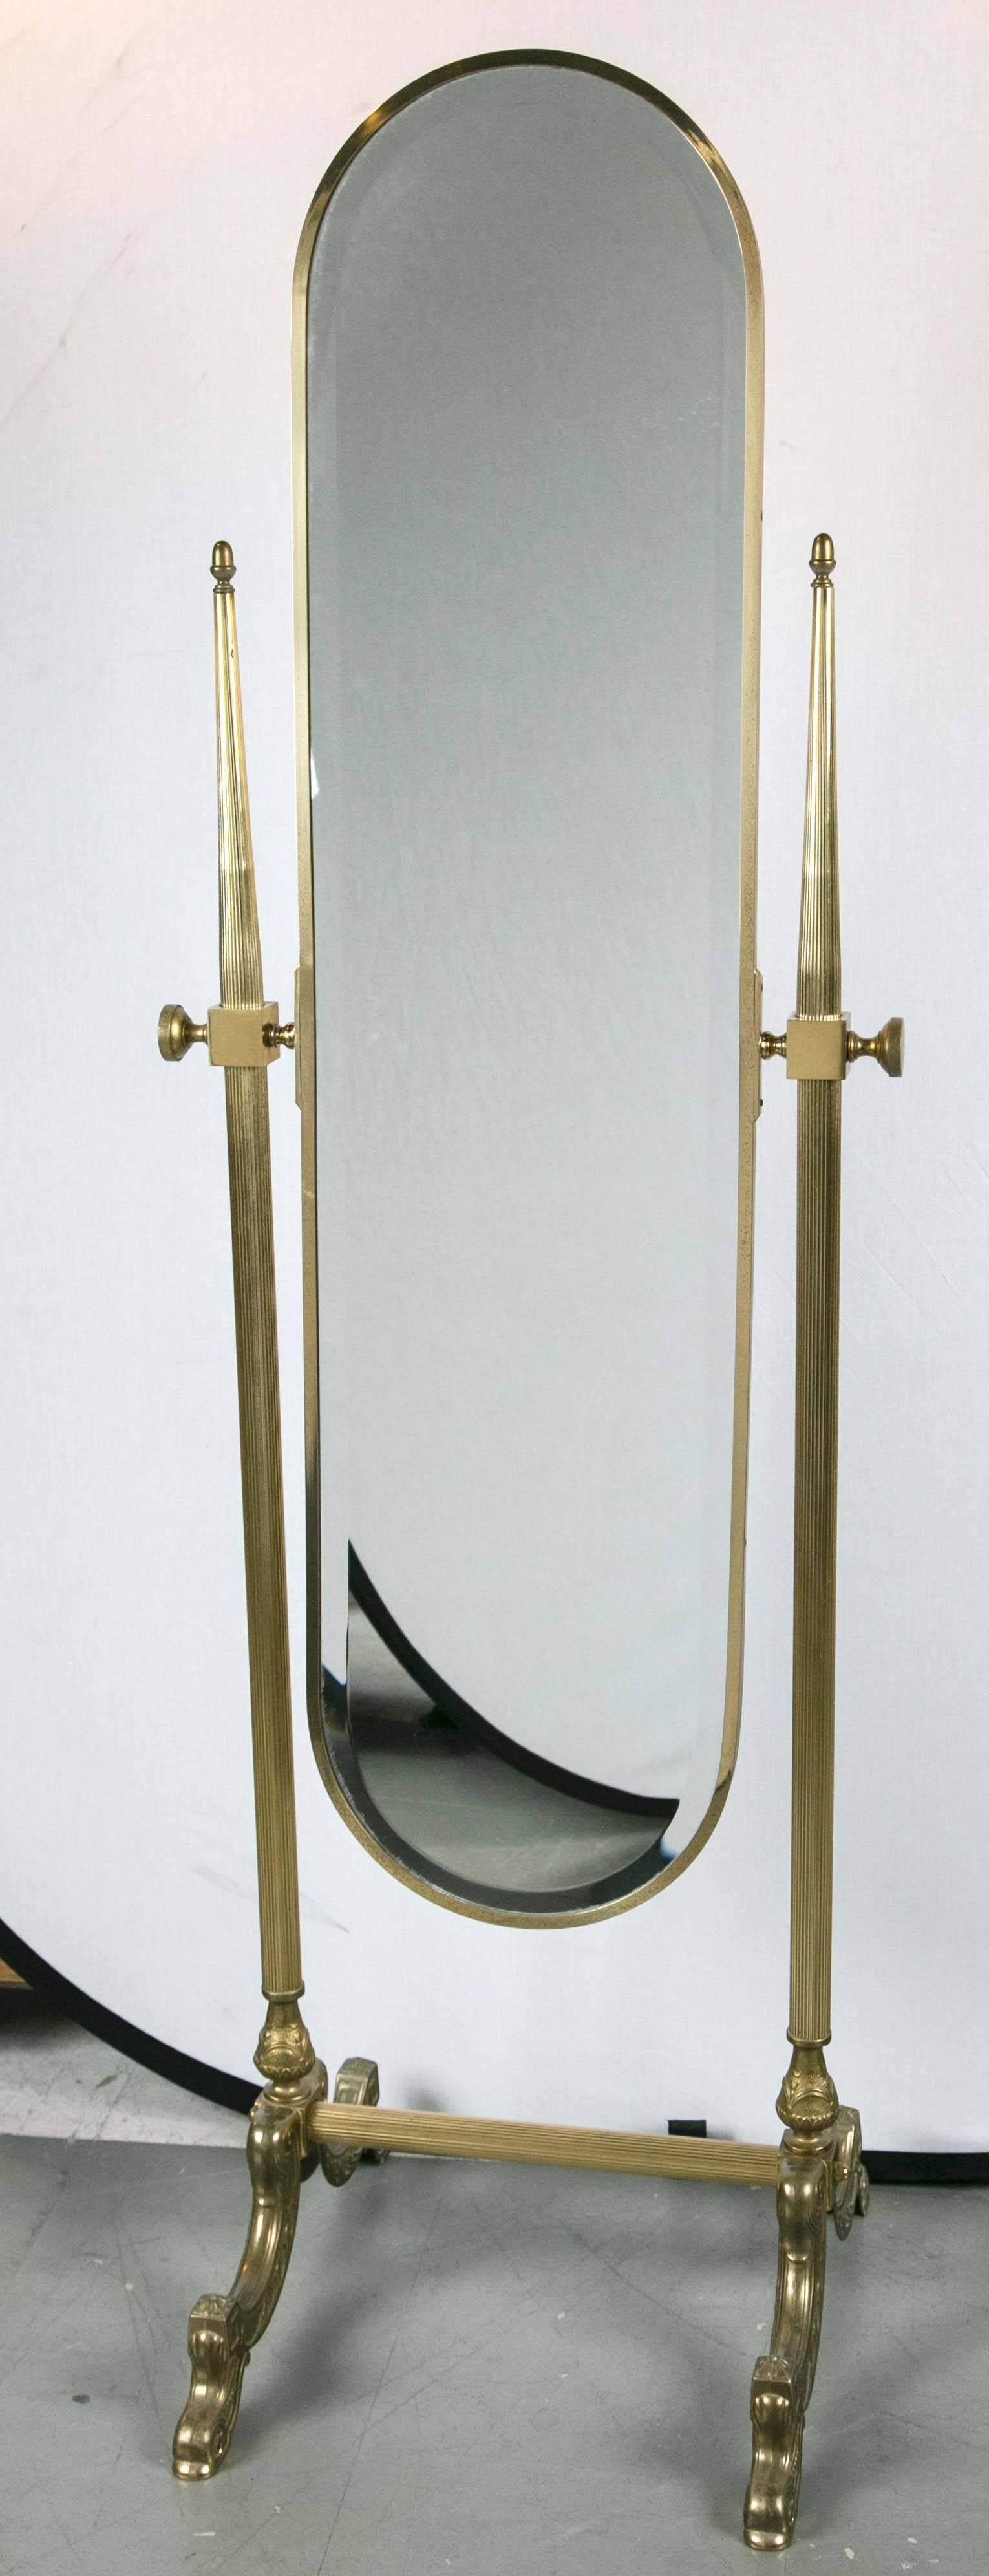 A unique French Parisian standing mirror with its legs ending in dolphin heads and original bevelled mirror intact.